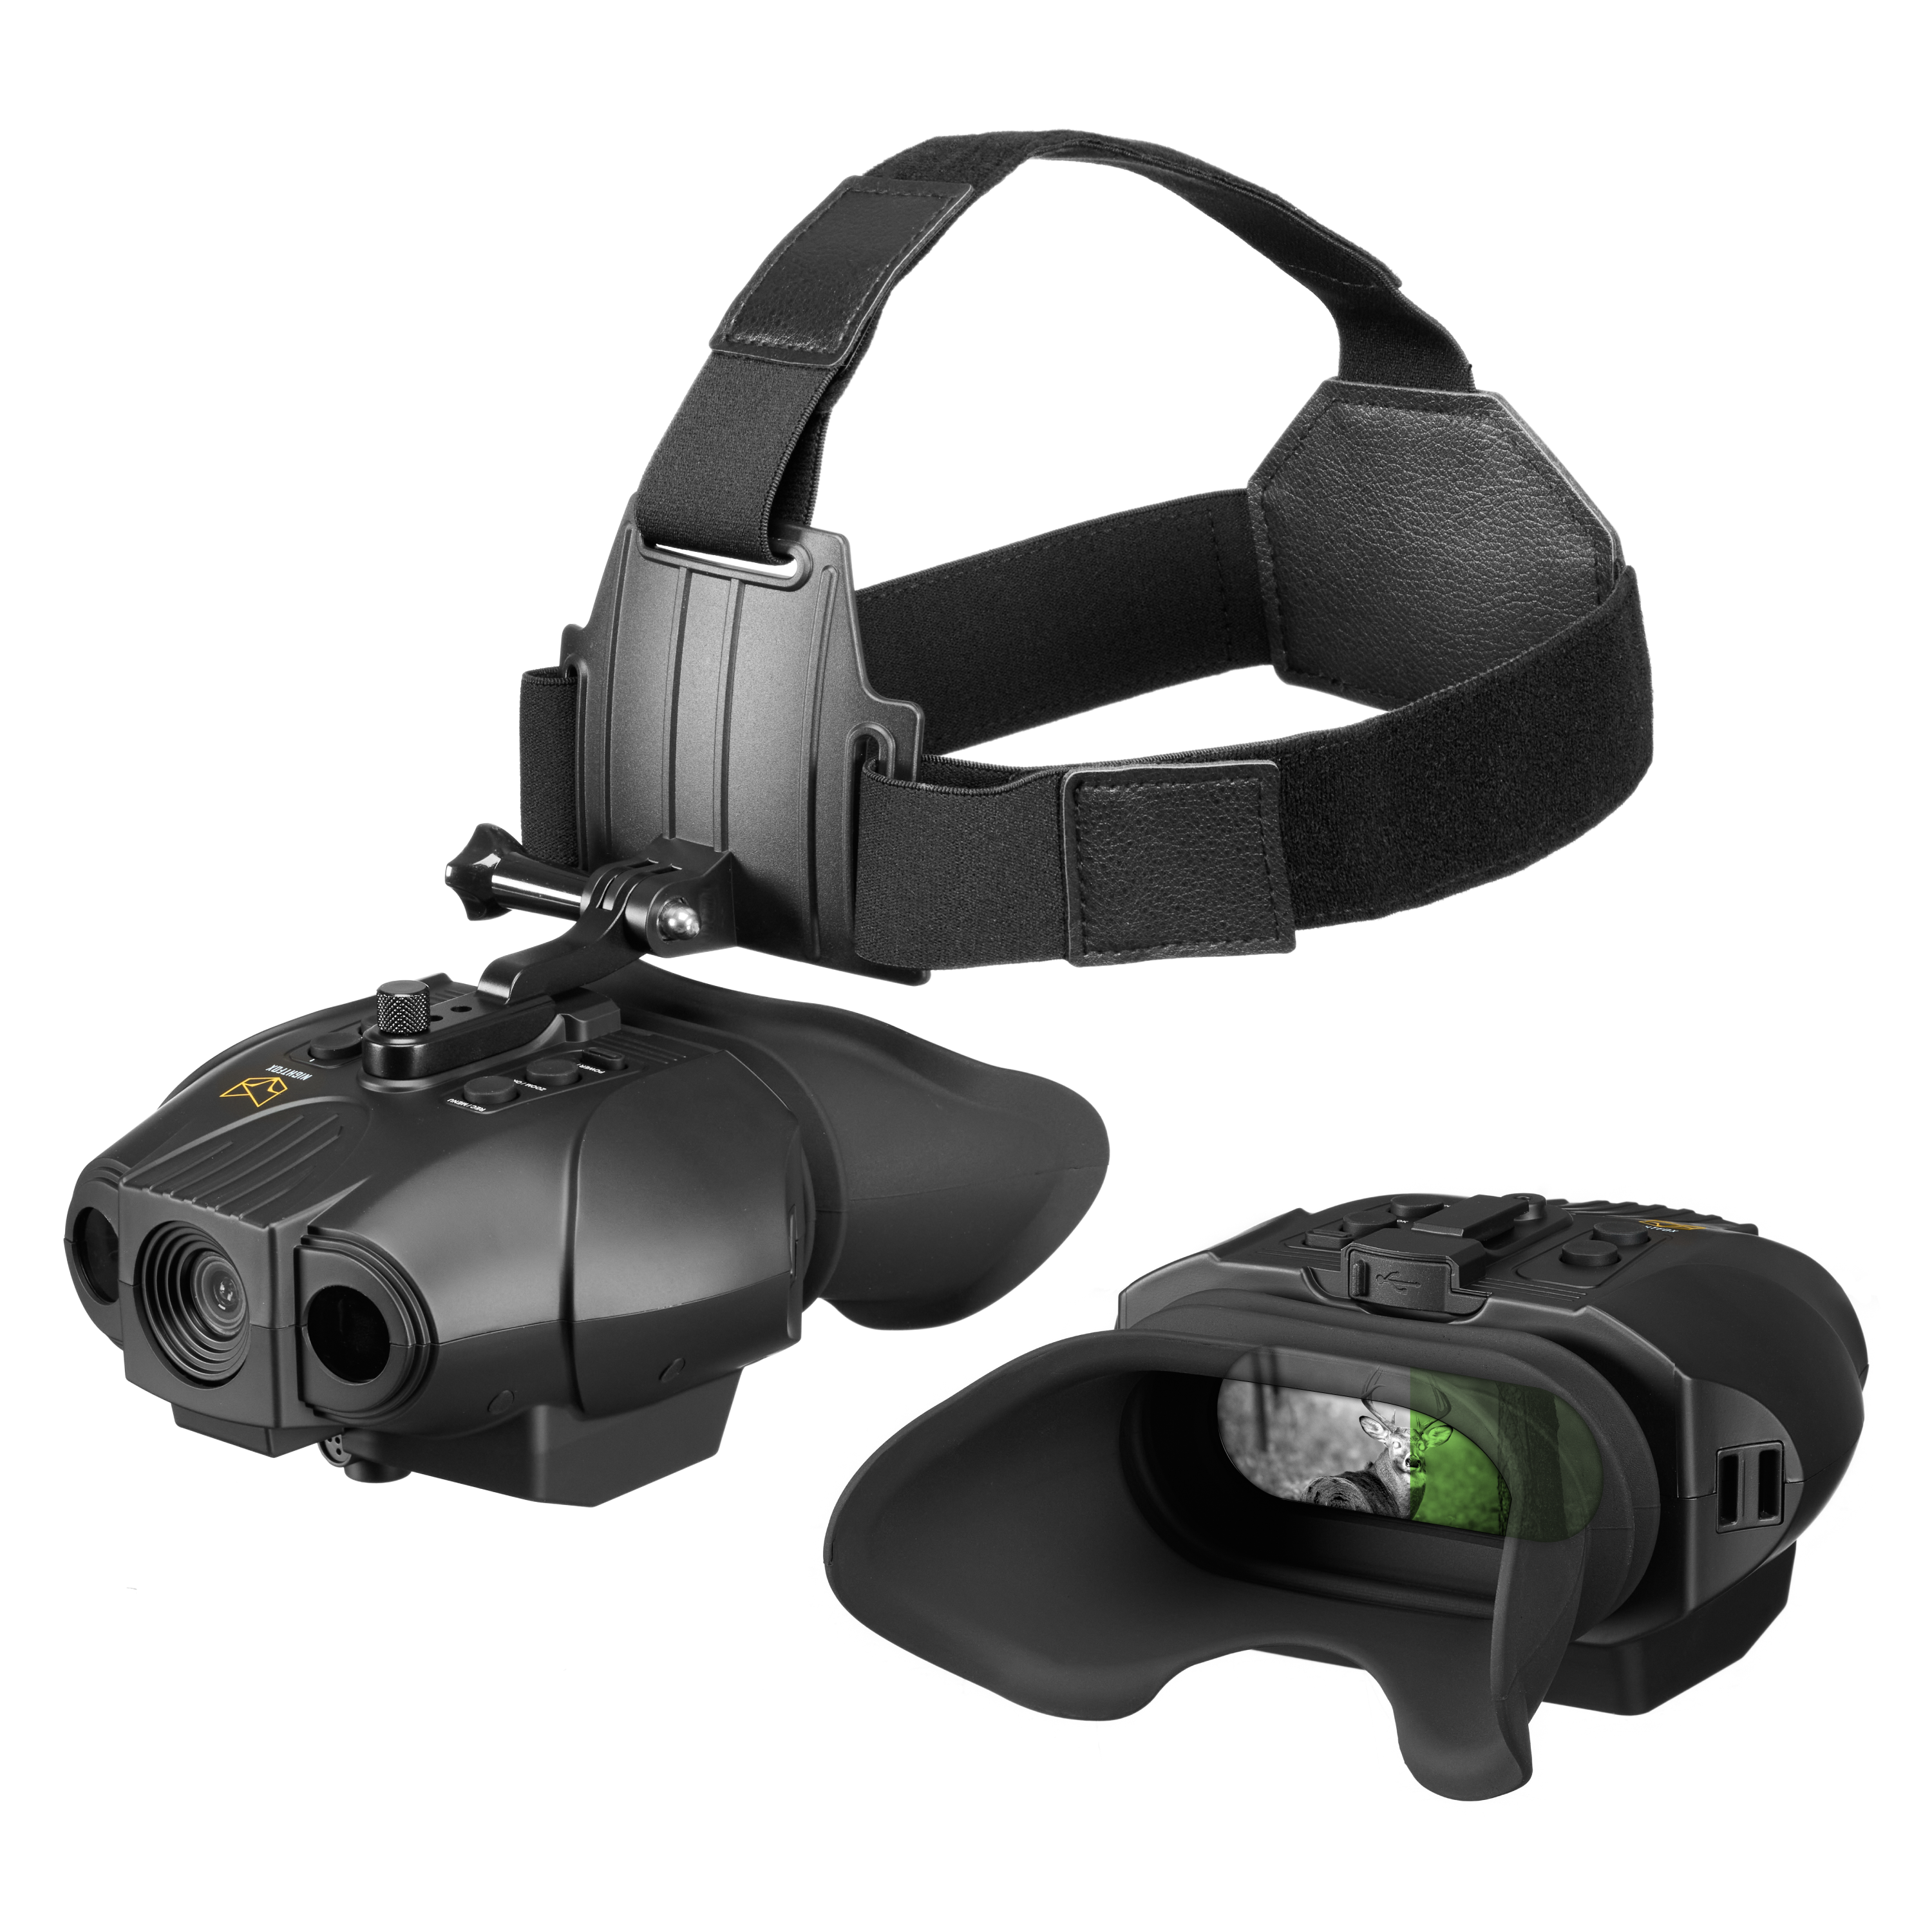 A picture of the Nightfox Swift 2 Night Vision Goggles